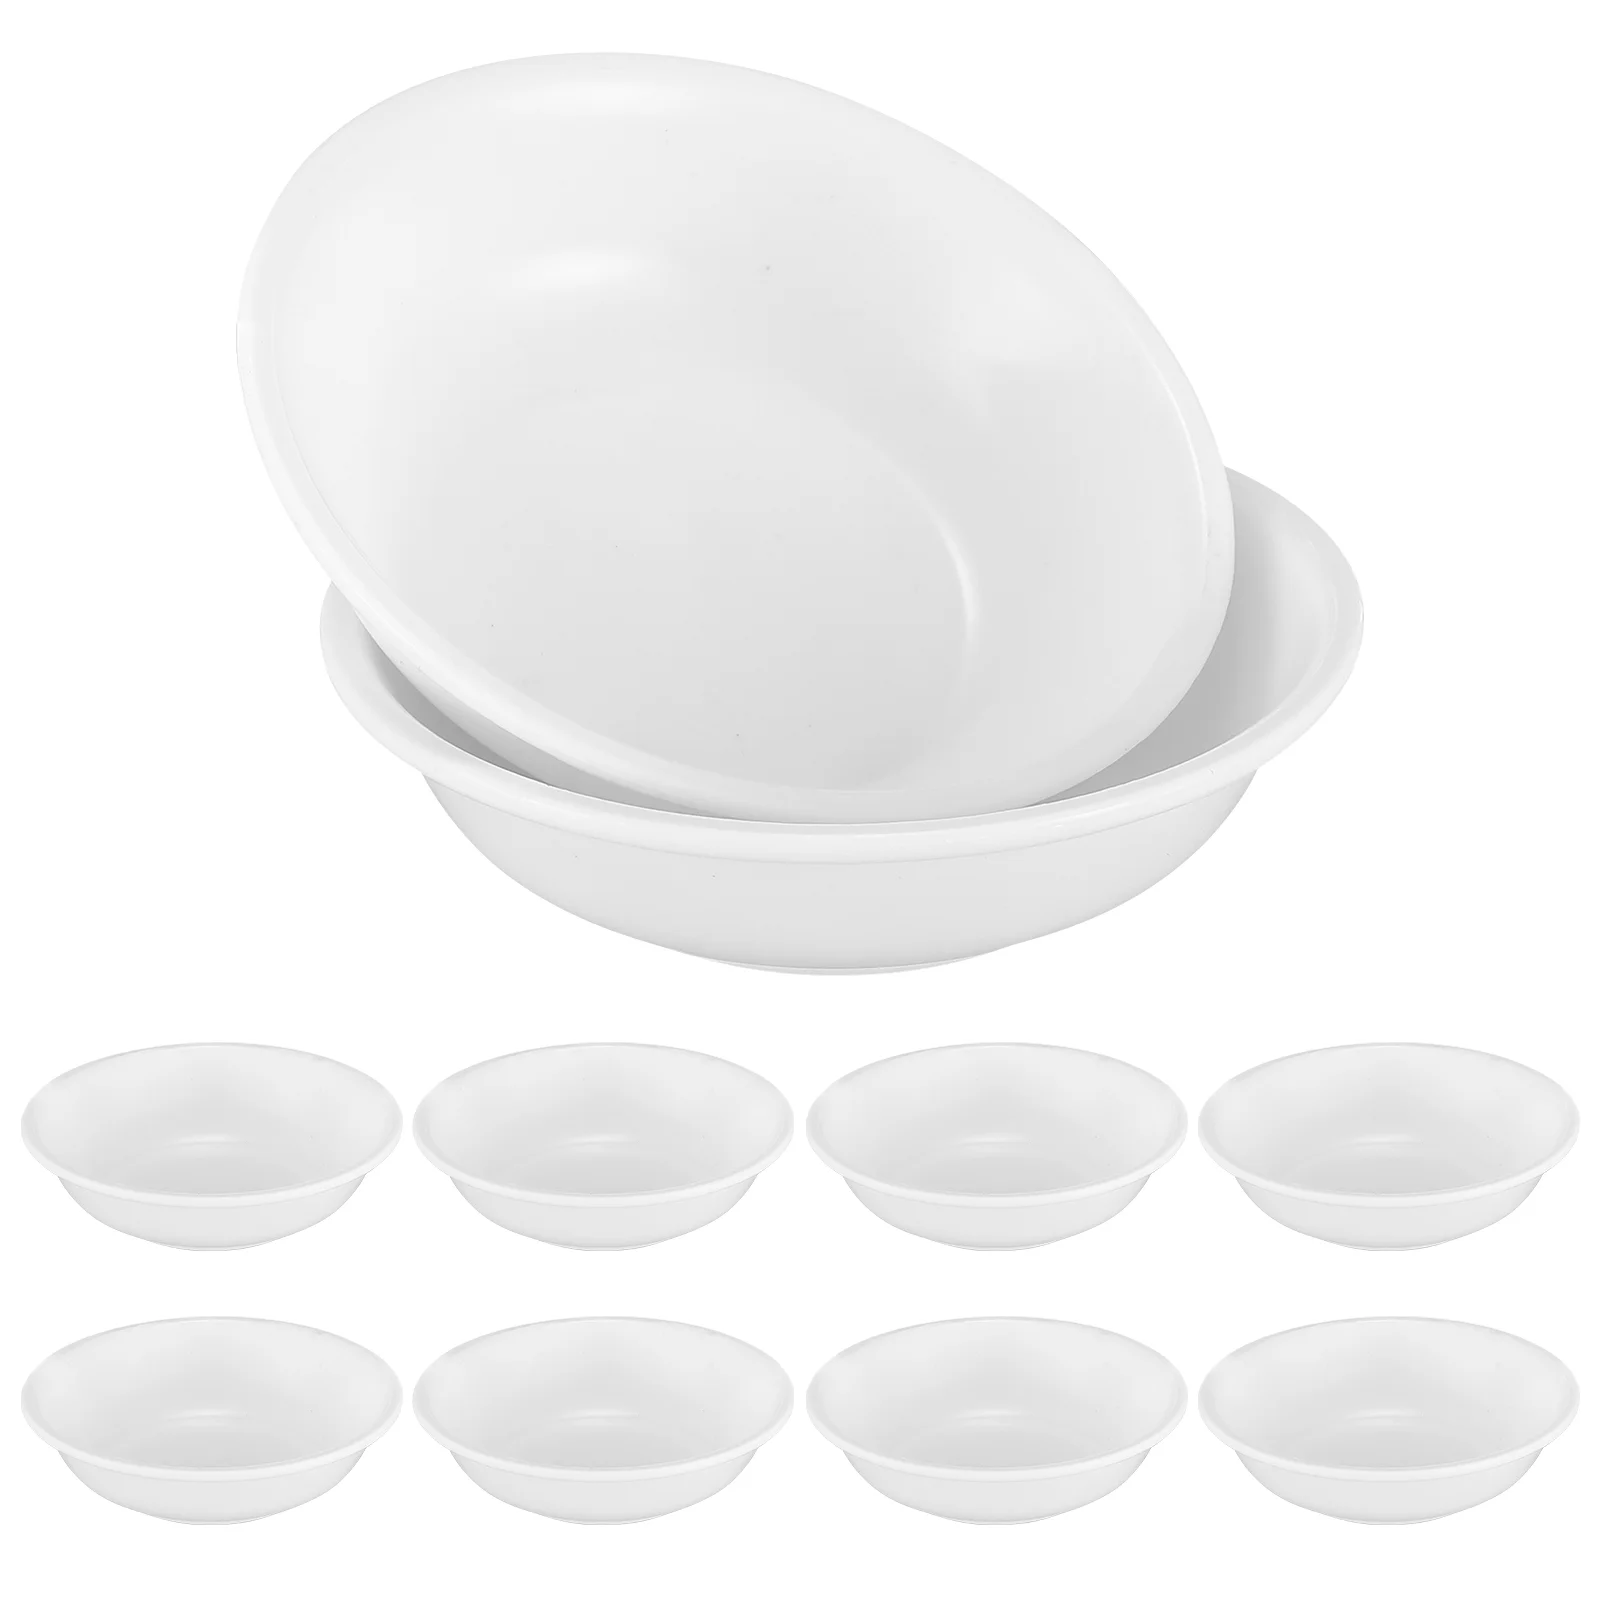 

Bowls Sauce Dipping Dishes Cups Dish Seasoning Appetizer Soy Pinch Condiment Bowl Food Prep Mini Plastic Shaped Salsa Tray